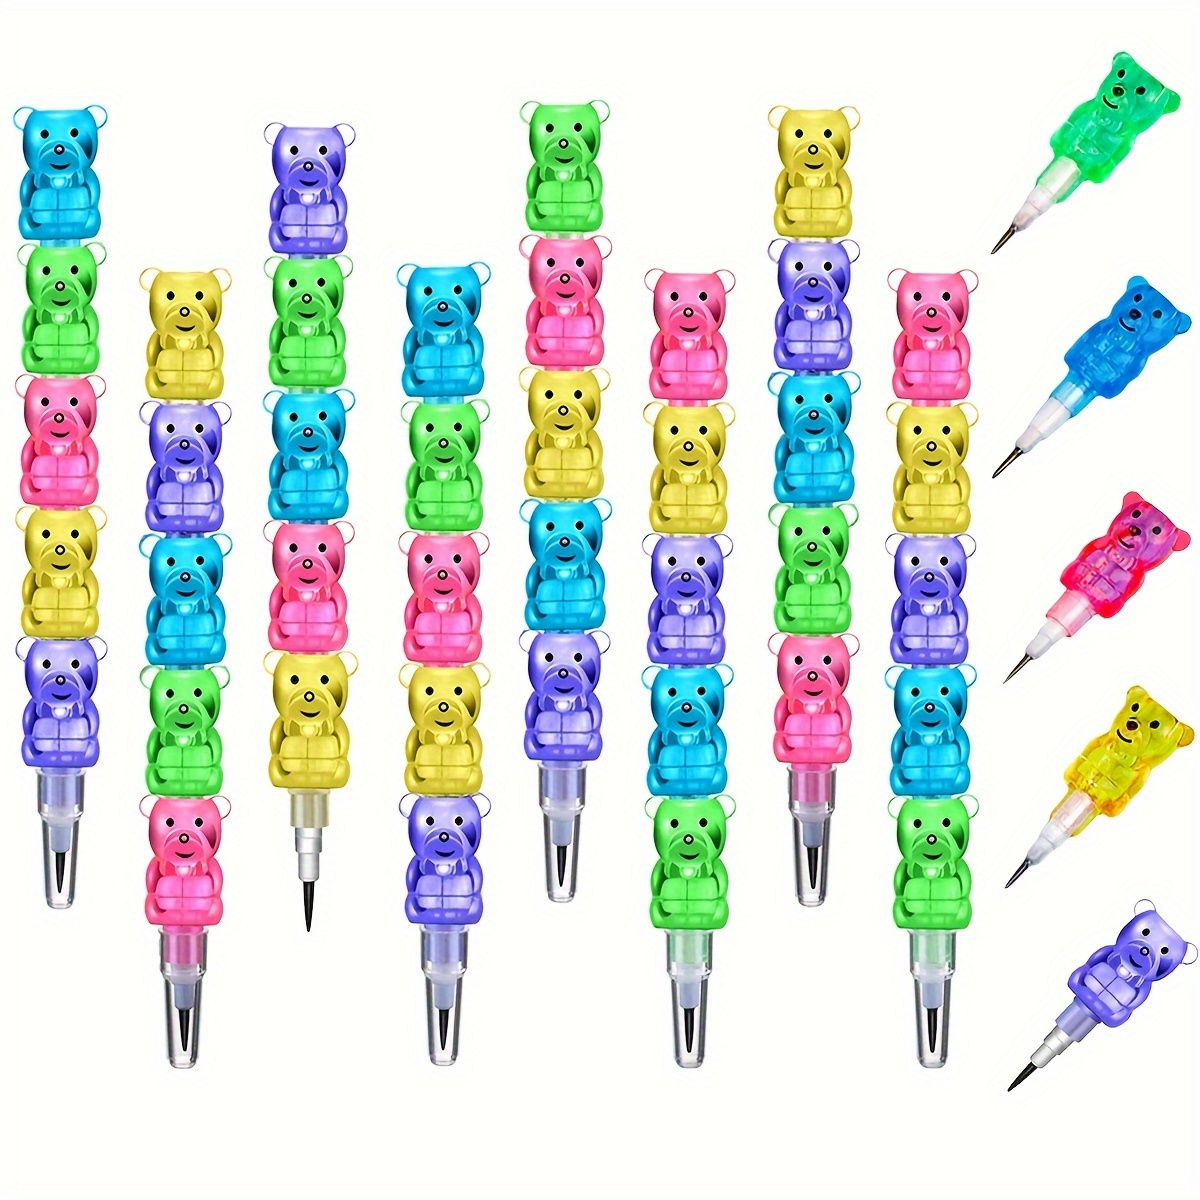 

Stackable Pencil, Plastic Bear Pencils Stacking Point Pencils 5 In 1 Stacking Colored Pencils Party Favors For Birthday Party Supplies School Fun Equipment Multiple Applications